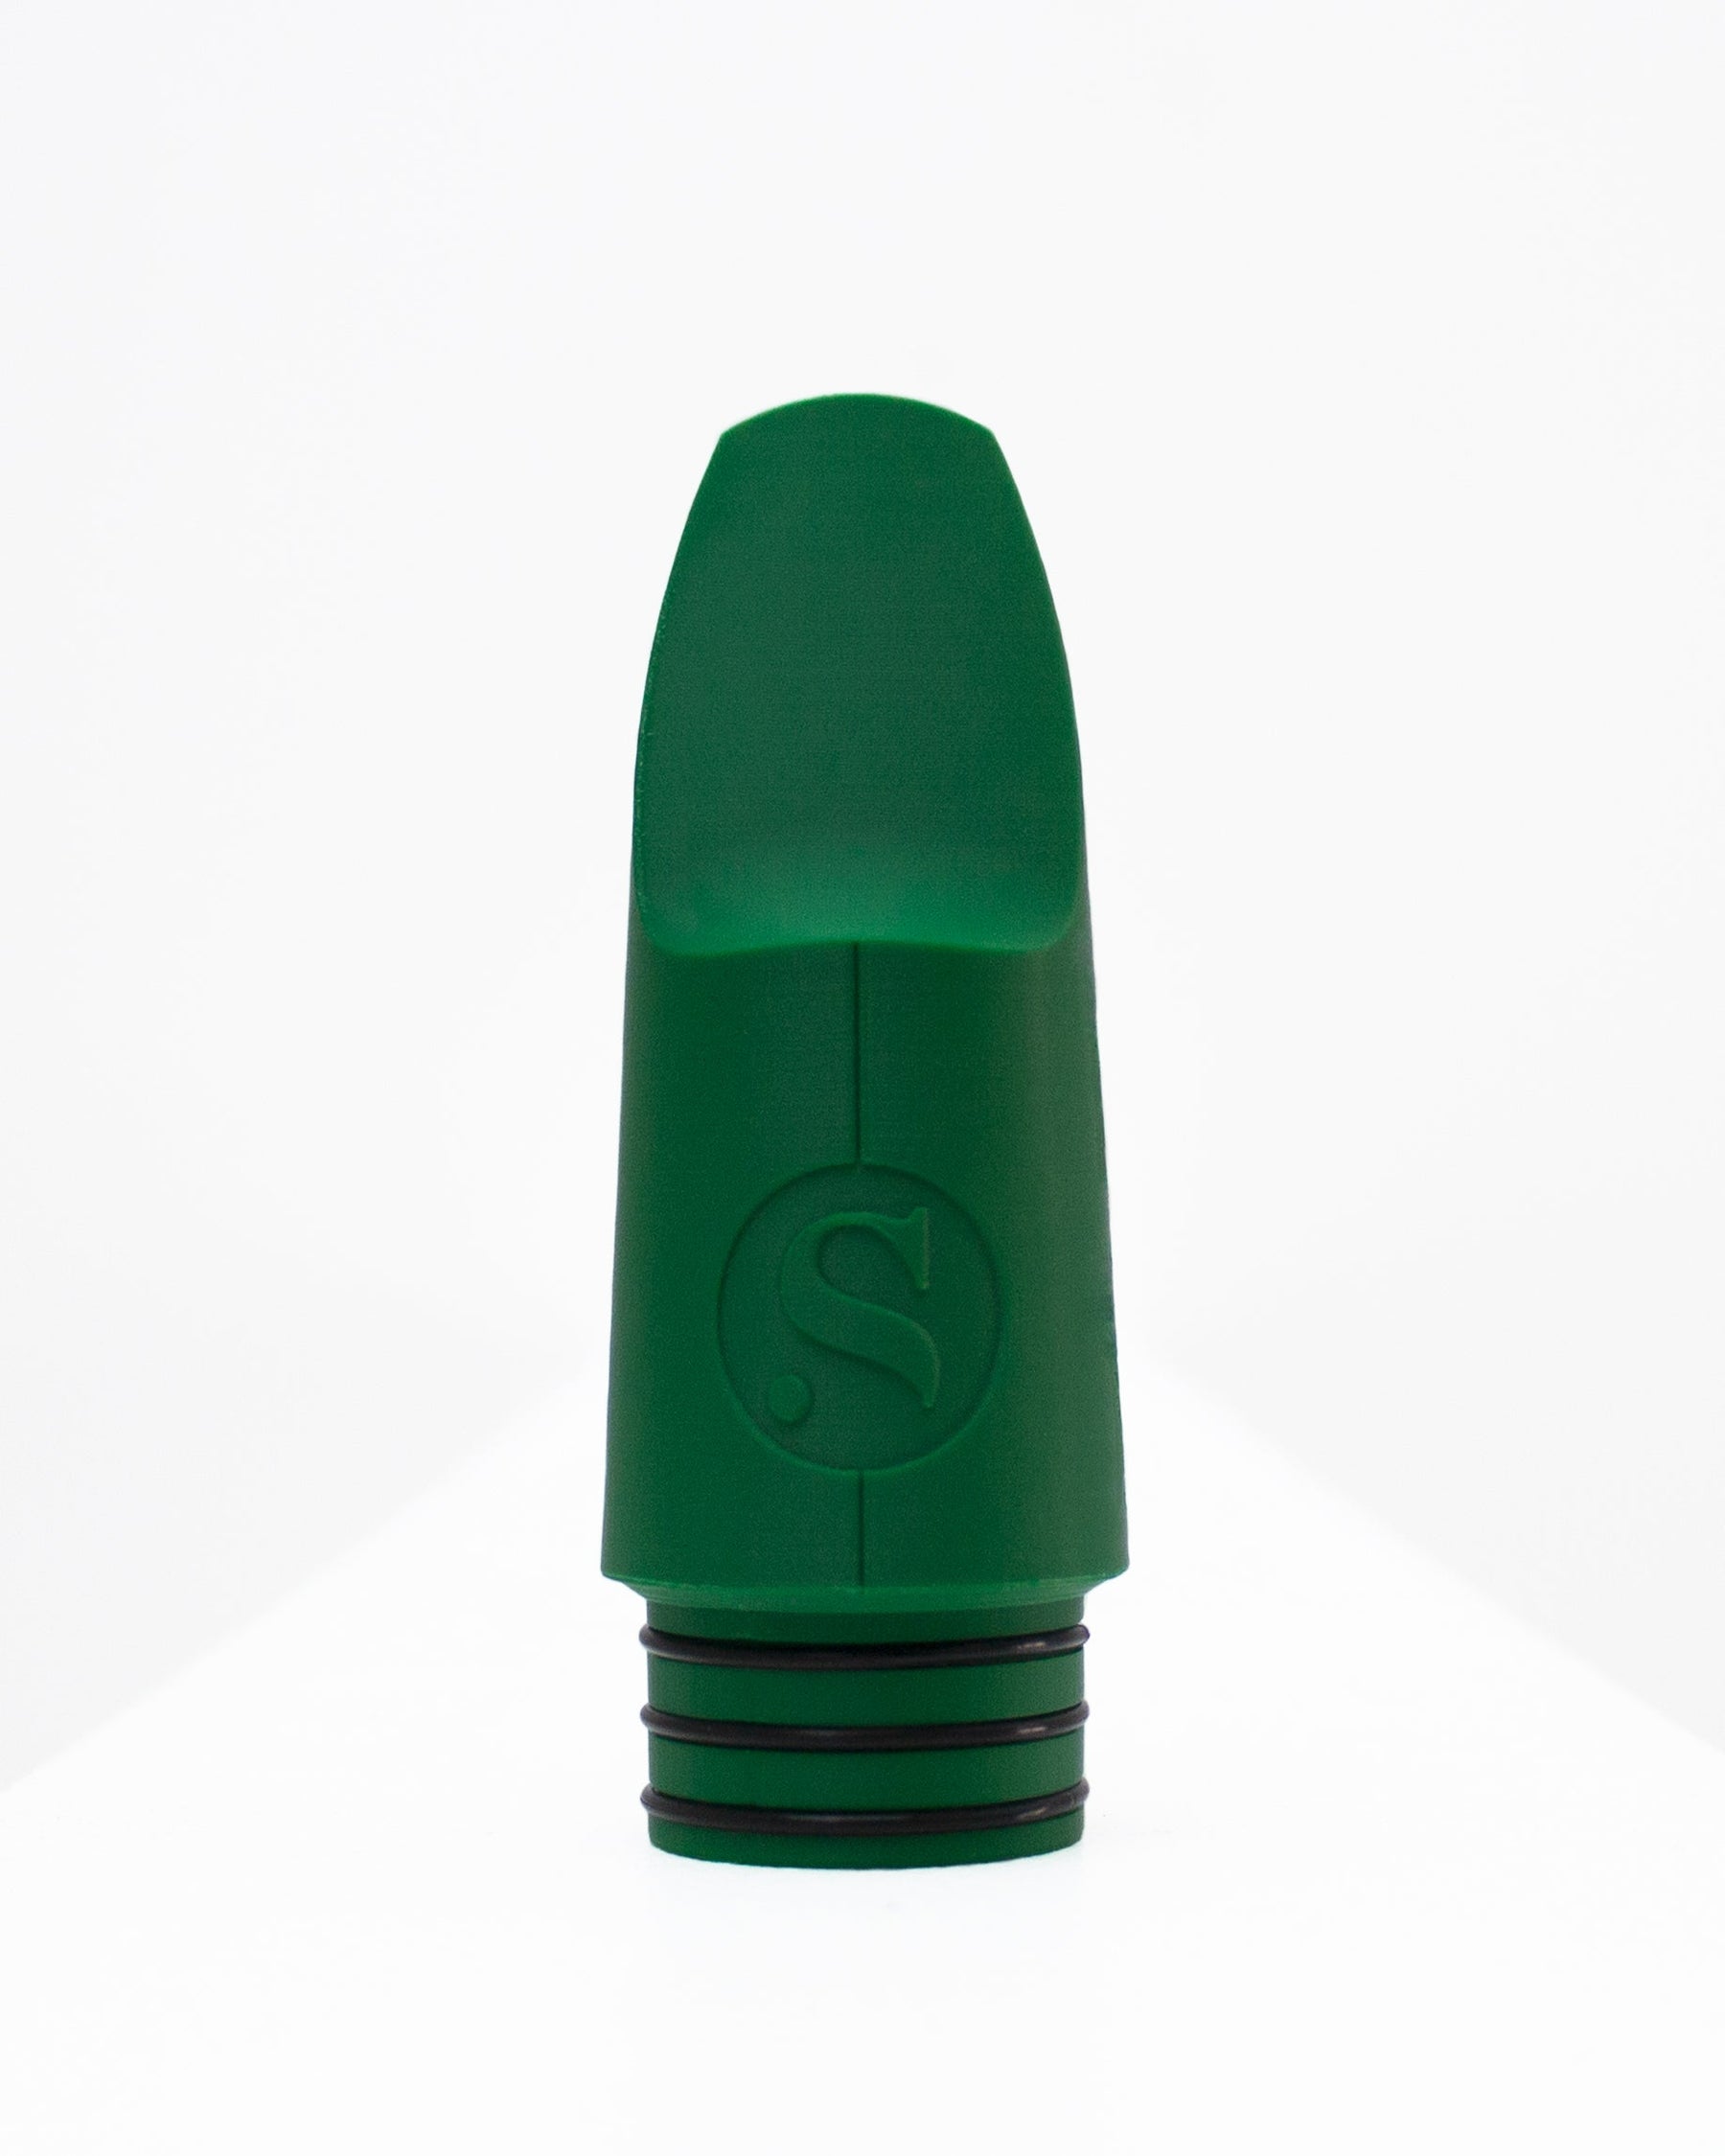 Bass Signature Clarinet mouthpiece - Todd Marcus by Syos - Forest Green